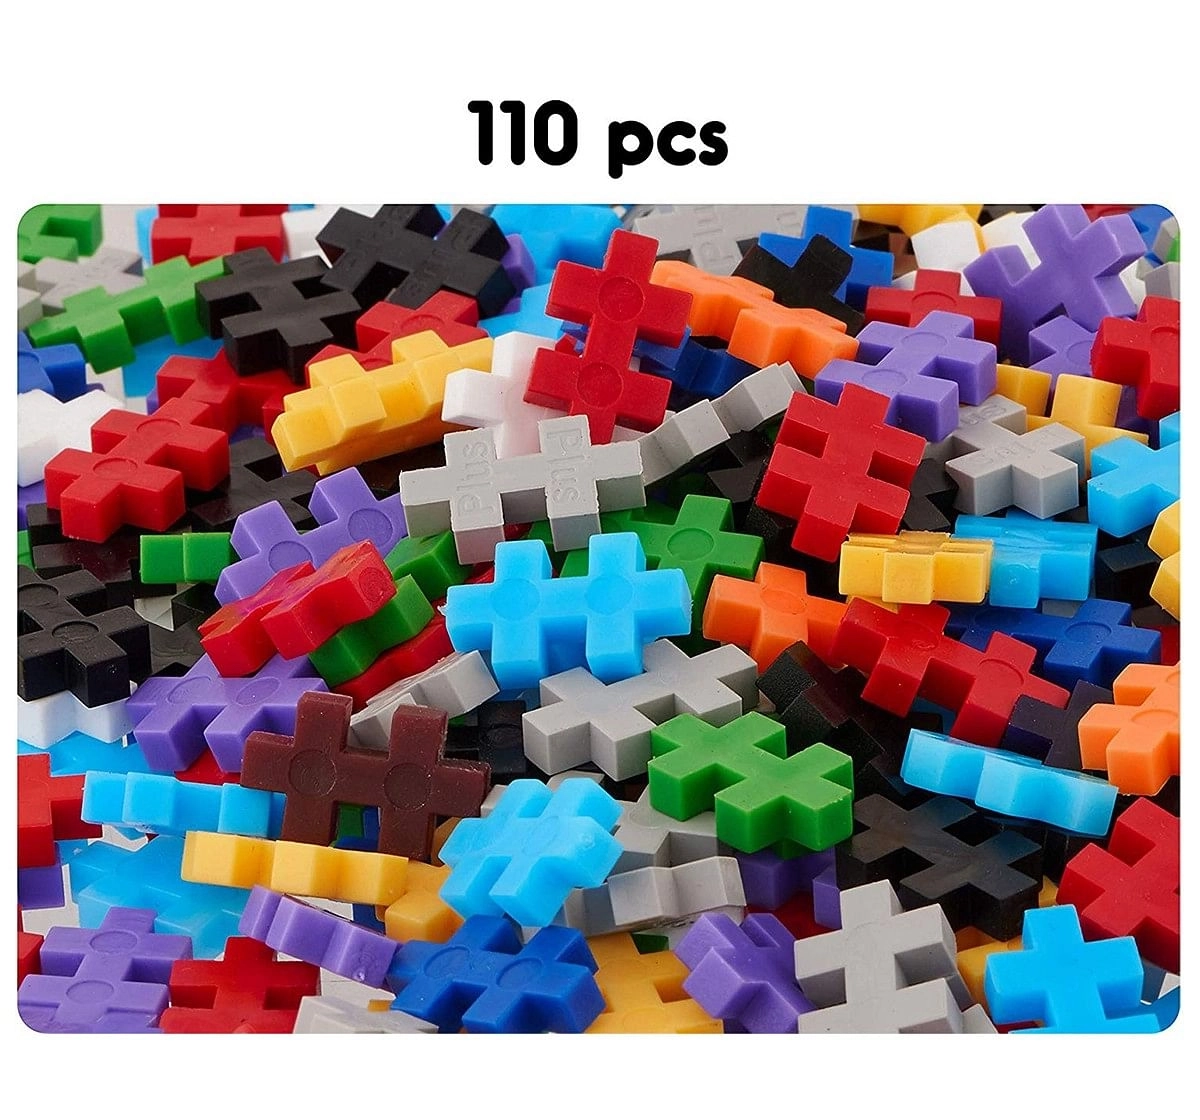 Play Panda Fixi Bricks Jungle Tube 1 Elephant And Giraffe With 110 Pcs, Detailed Assembly Instructions And Storage Tube Small Parts (Age 799 Years),  4Y+ (Multicolor)